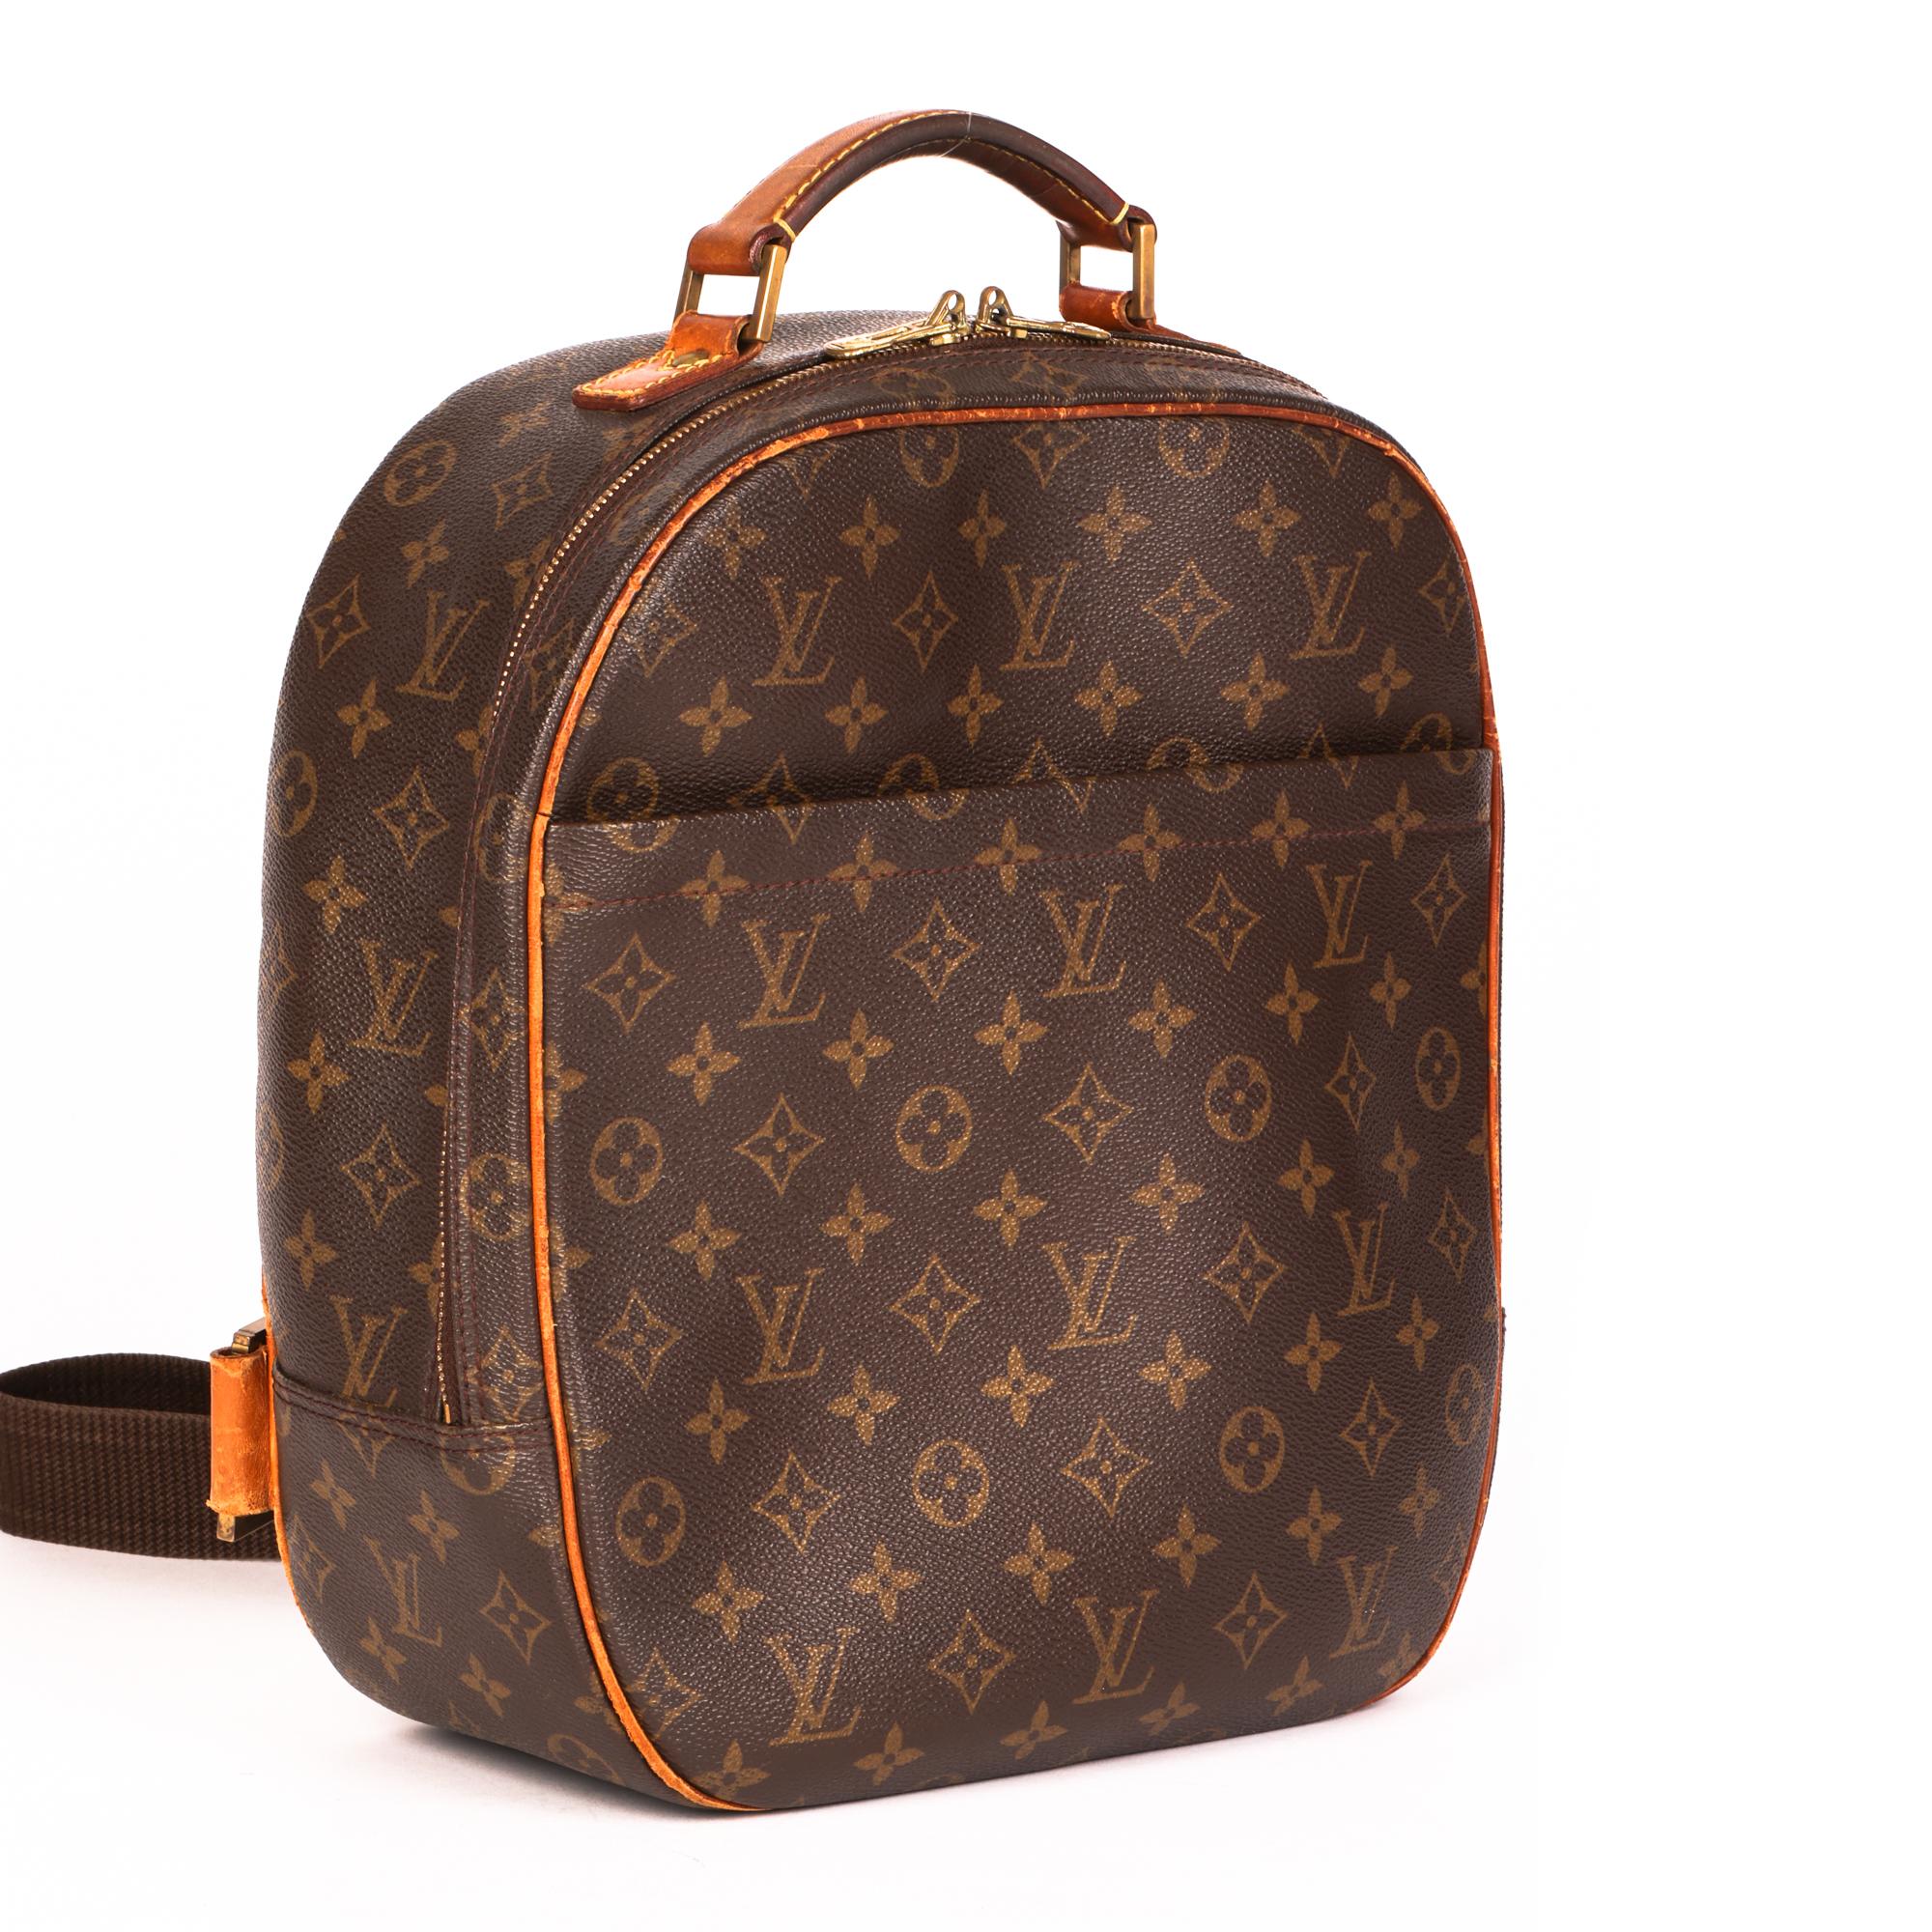 LOUIS VUITTON
Brown Monogram Coated Canvas & Vachetta Leather Packall MM

Xupes Reference: CB536
Serial Number: BA1020
Age (Circa): 2000
Authenticity Details: Date Stamp (Made in France)
Gender: Ladies
Type: Top Handle, Crossbody, Shoulder,